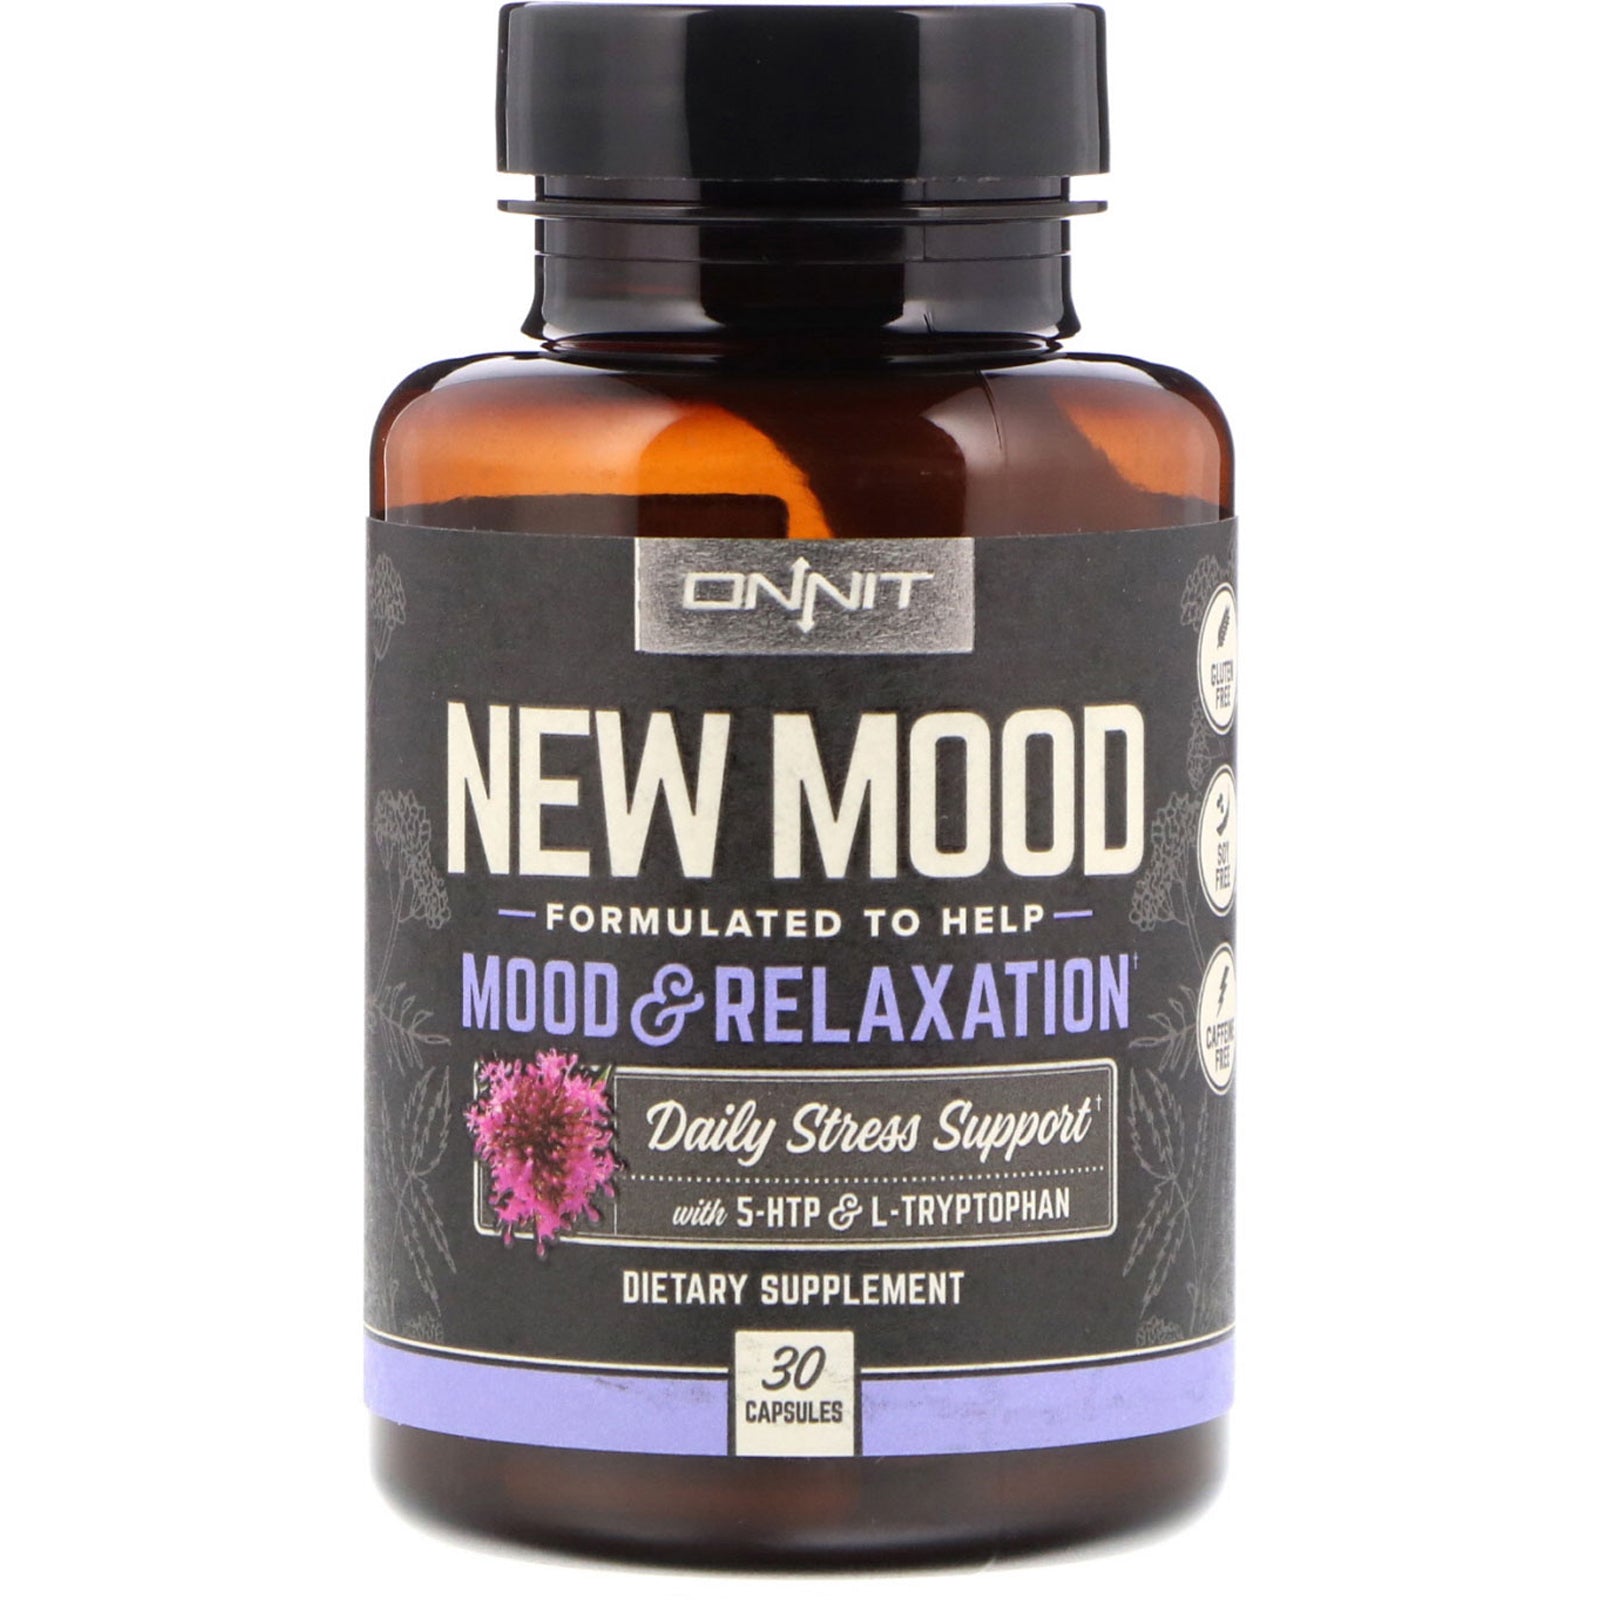 Onnit, New Mood, Mood & Relaxation,Capsules